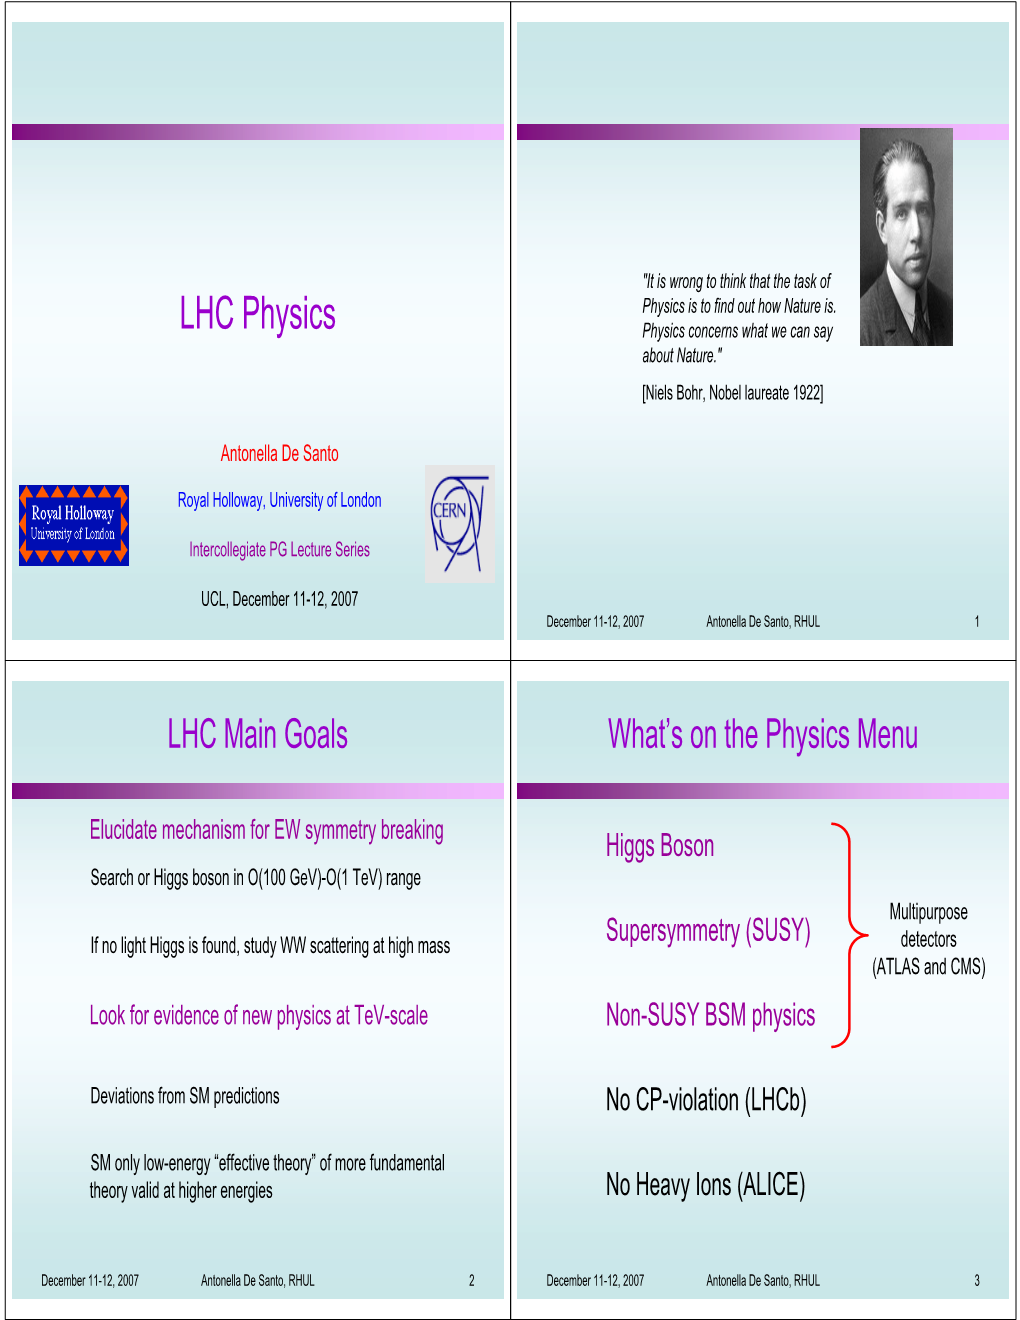 LHC Physics Physics Concerns What We Can Say About Nature." [Niels Bohr, Nobel Laureate 1922]